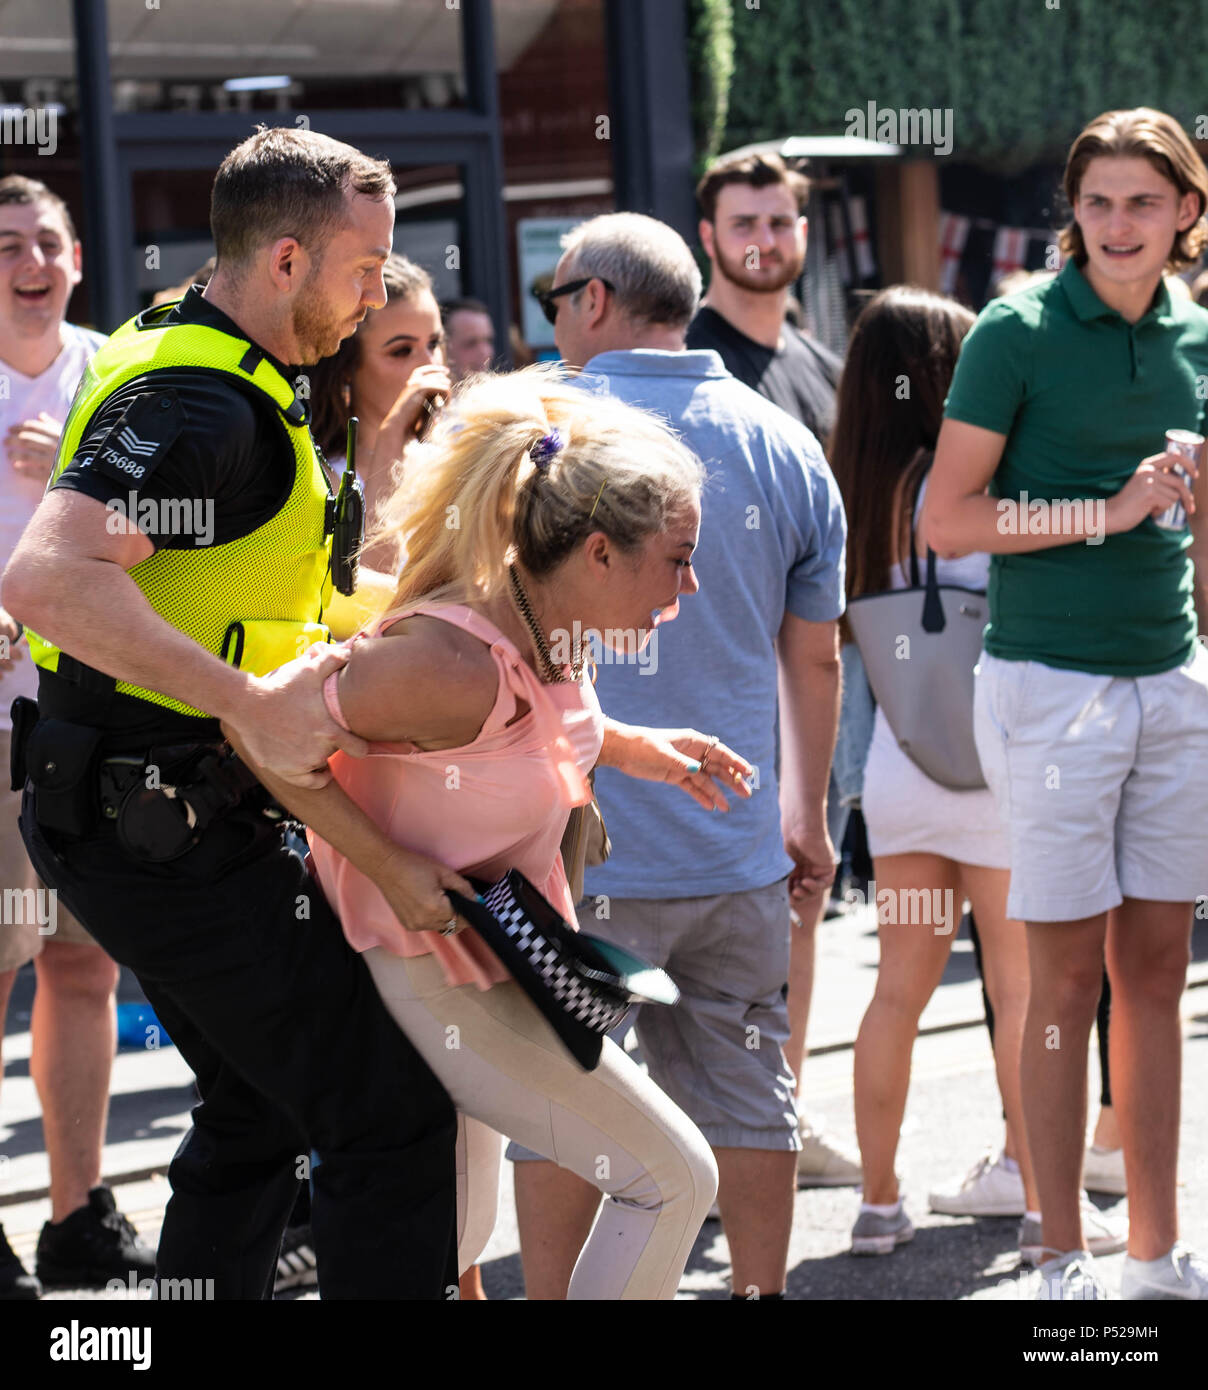 Brentwood, UK. 24 June 2018.  Large scale disorder in Brentwood High Street following England win in World Cup game.  Police required reinforcements, had their hats stolen and when a girl was detained for taking a hat the crowd threw cups and bottles at the police line.  Credit Ian Davidson/Alamy Live News Stock Photo